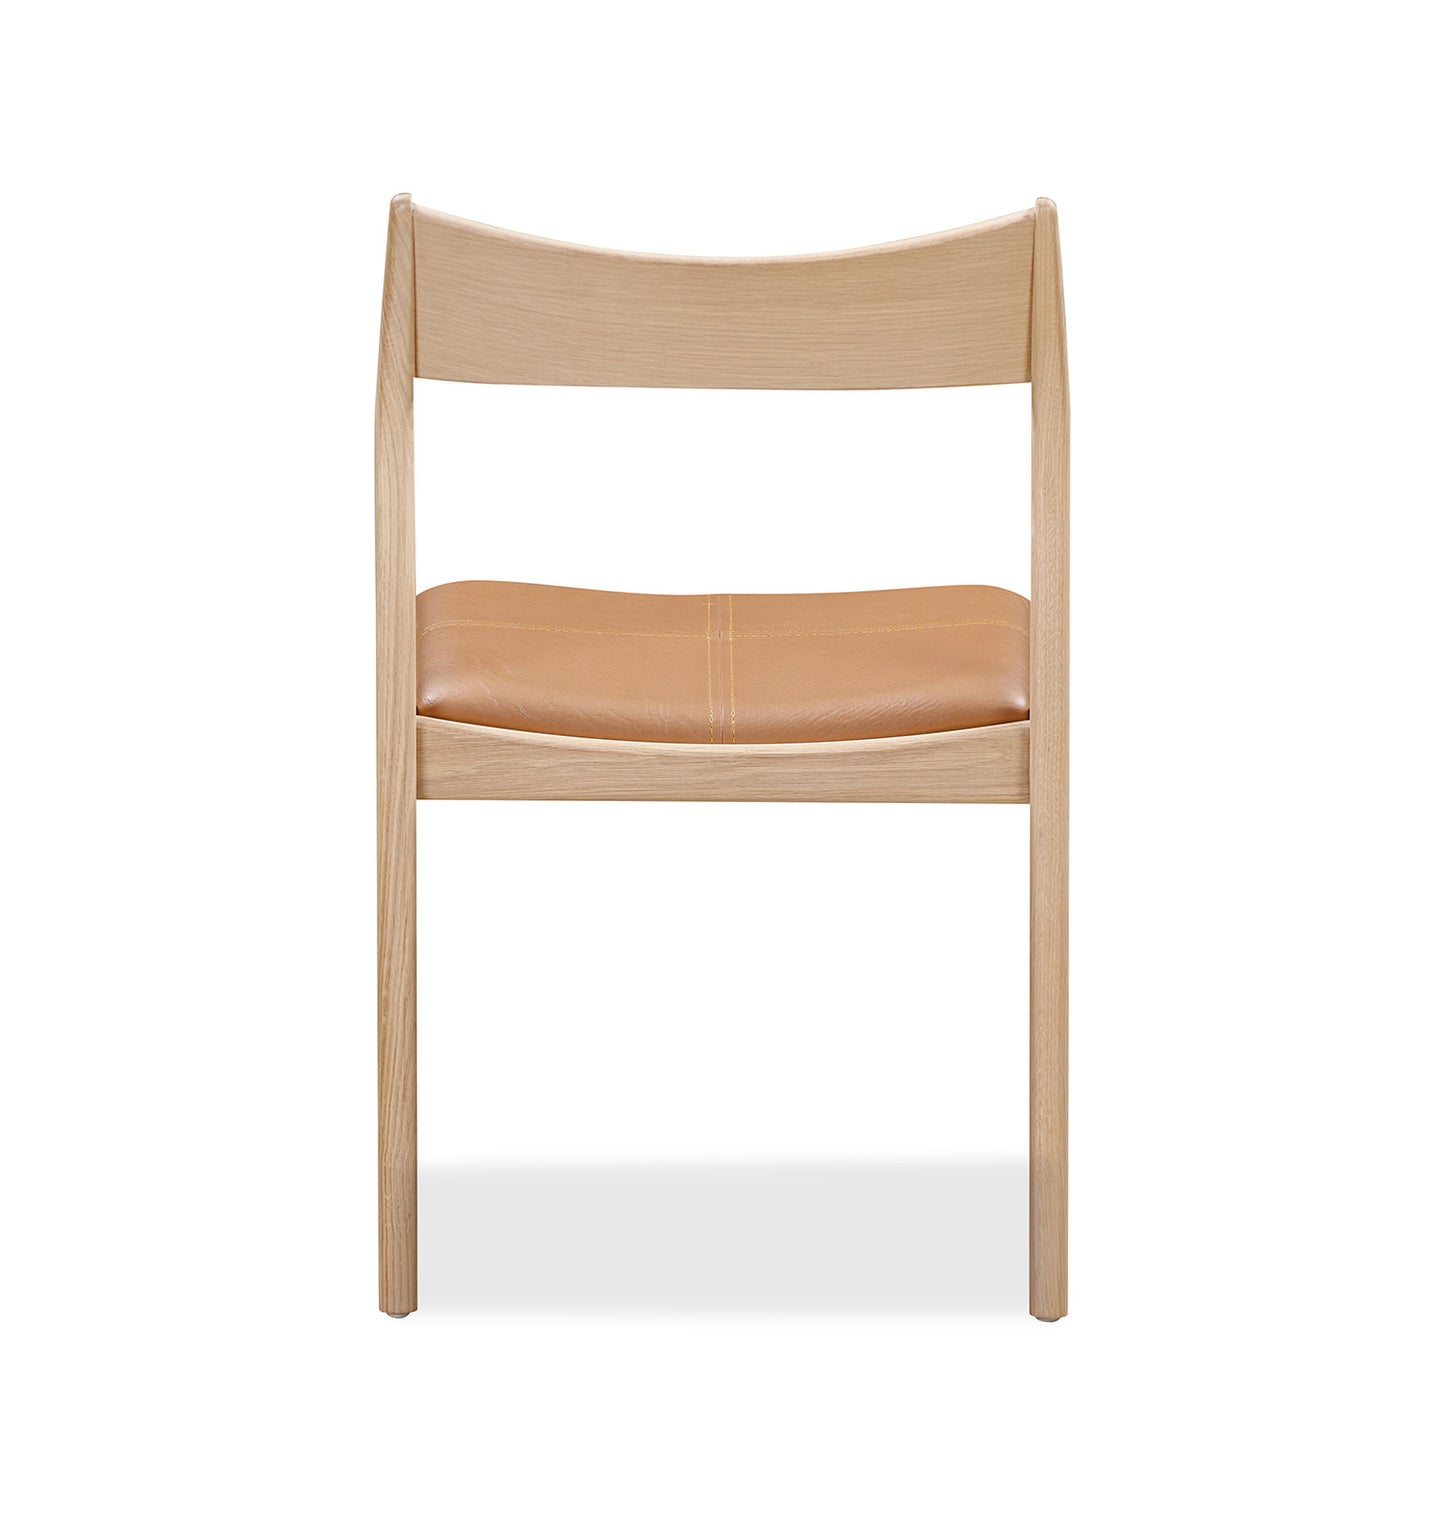 Eclipse Dining Chair - Oak / Tan Leather